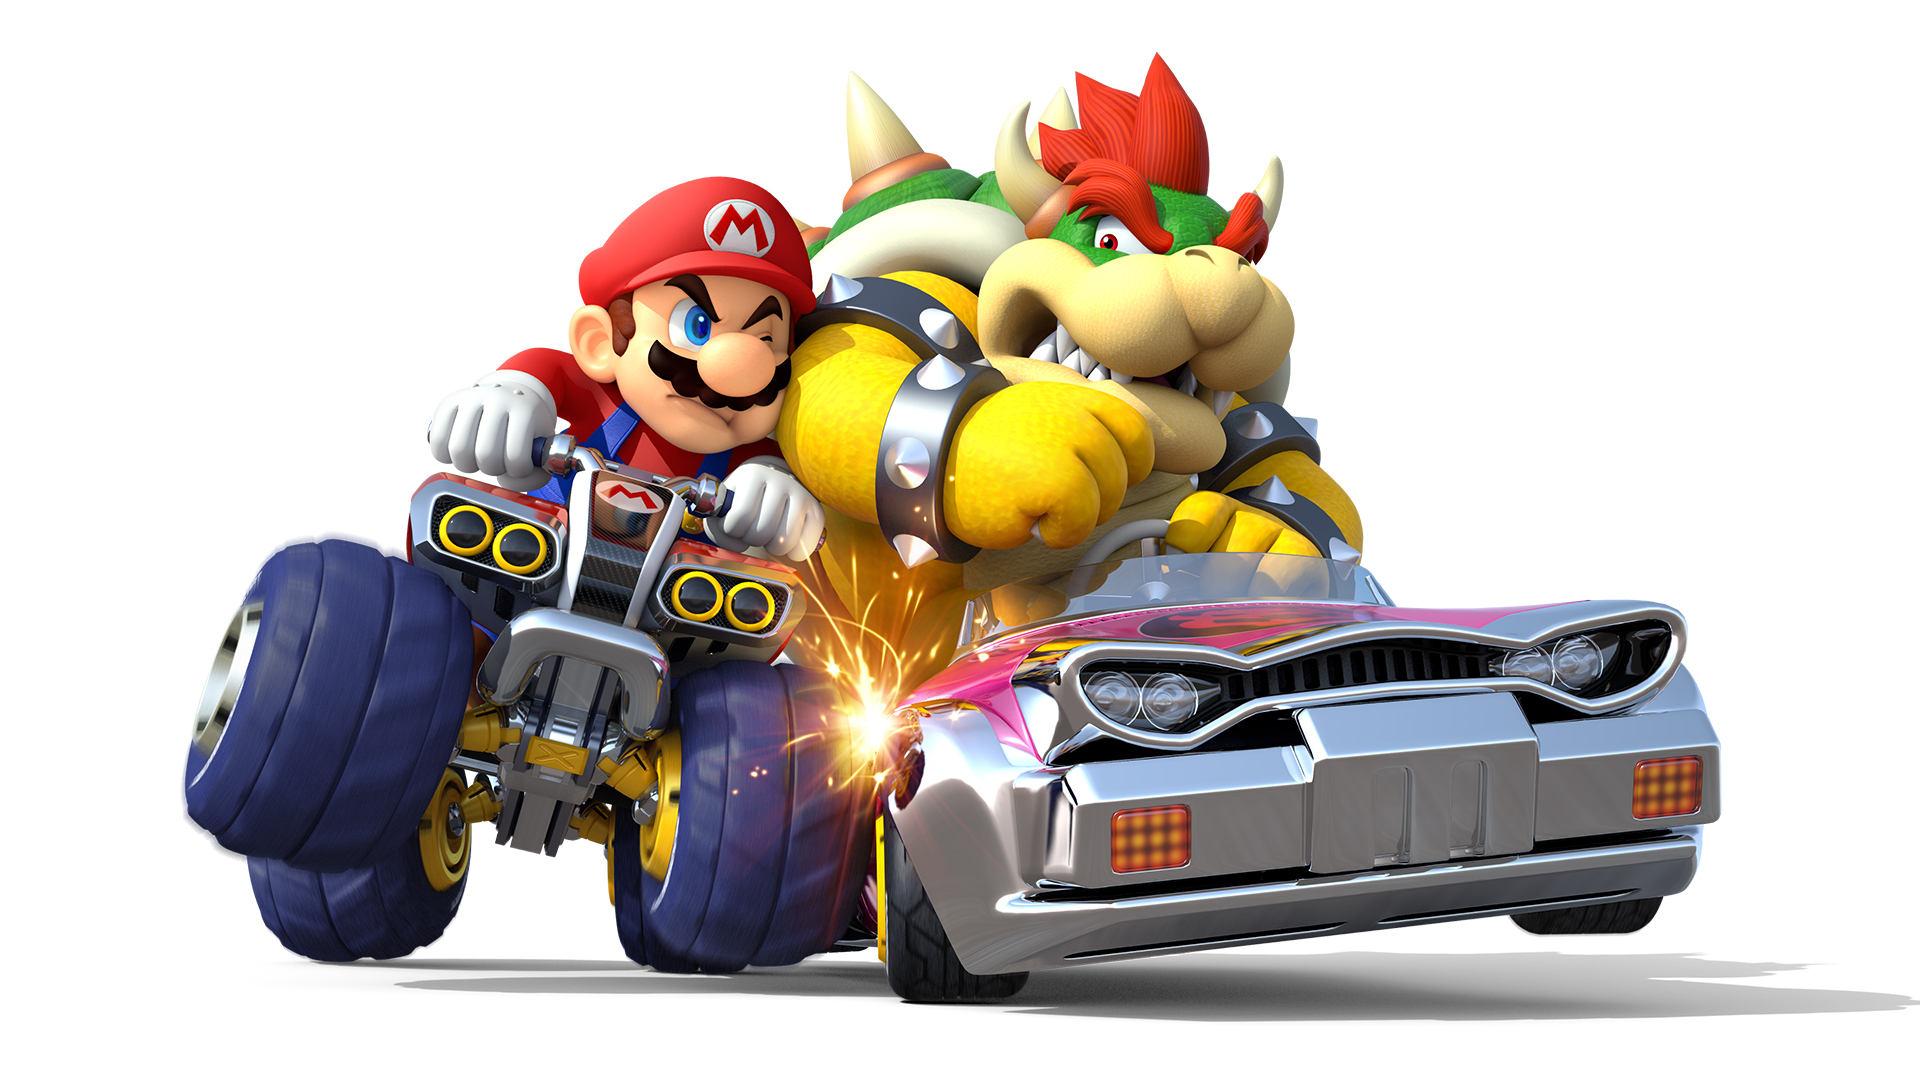 download new mario kart track for free